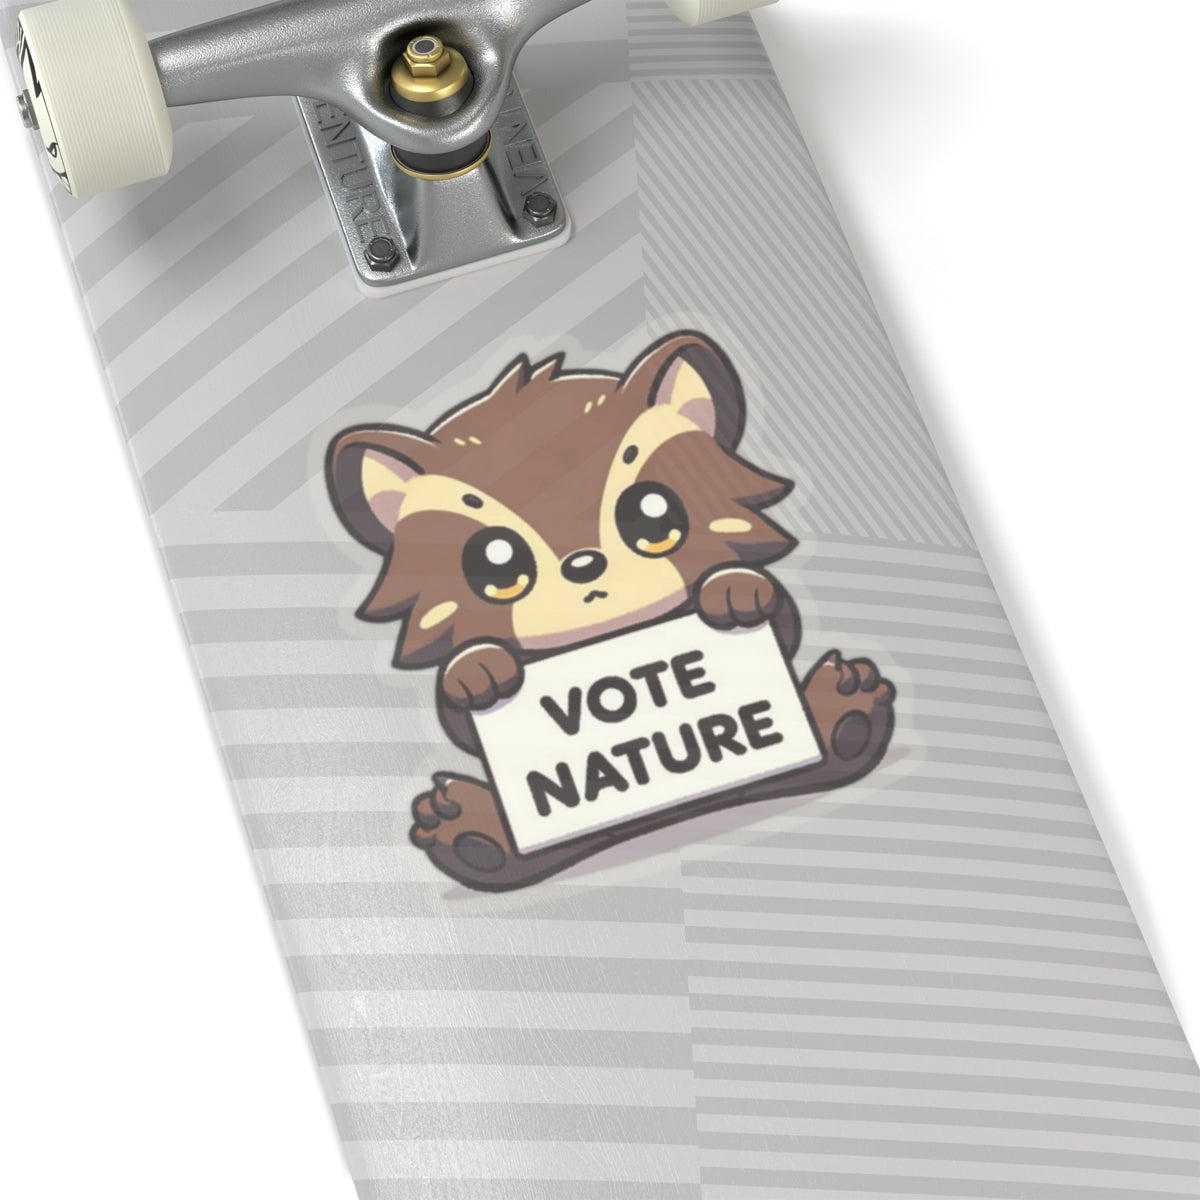 Inspirational Cute Wolverine Statement vinyl Sticker: Vote Nature! for laptop, kindle, phone, ipad, instrument case, notebook, mood board